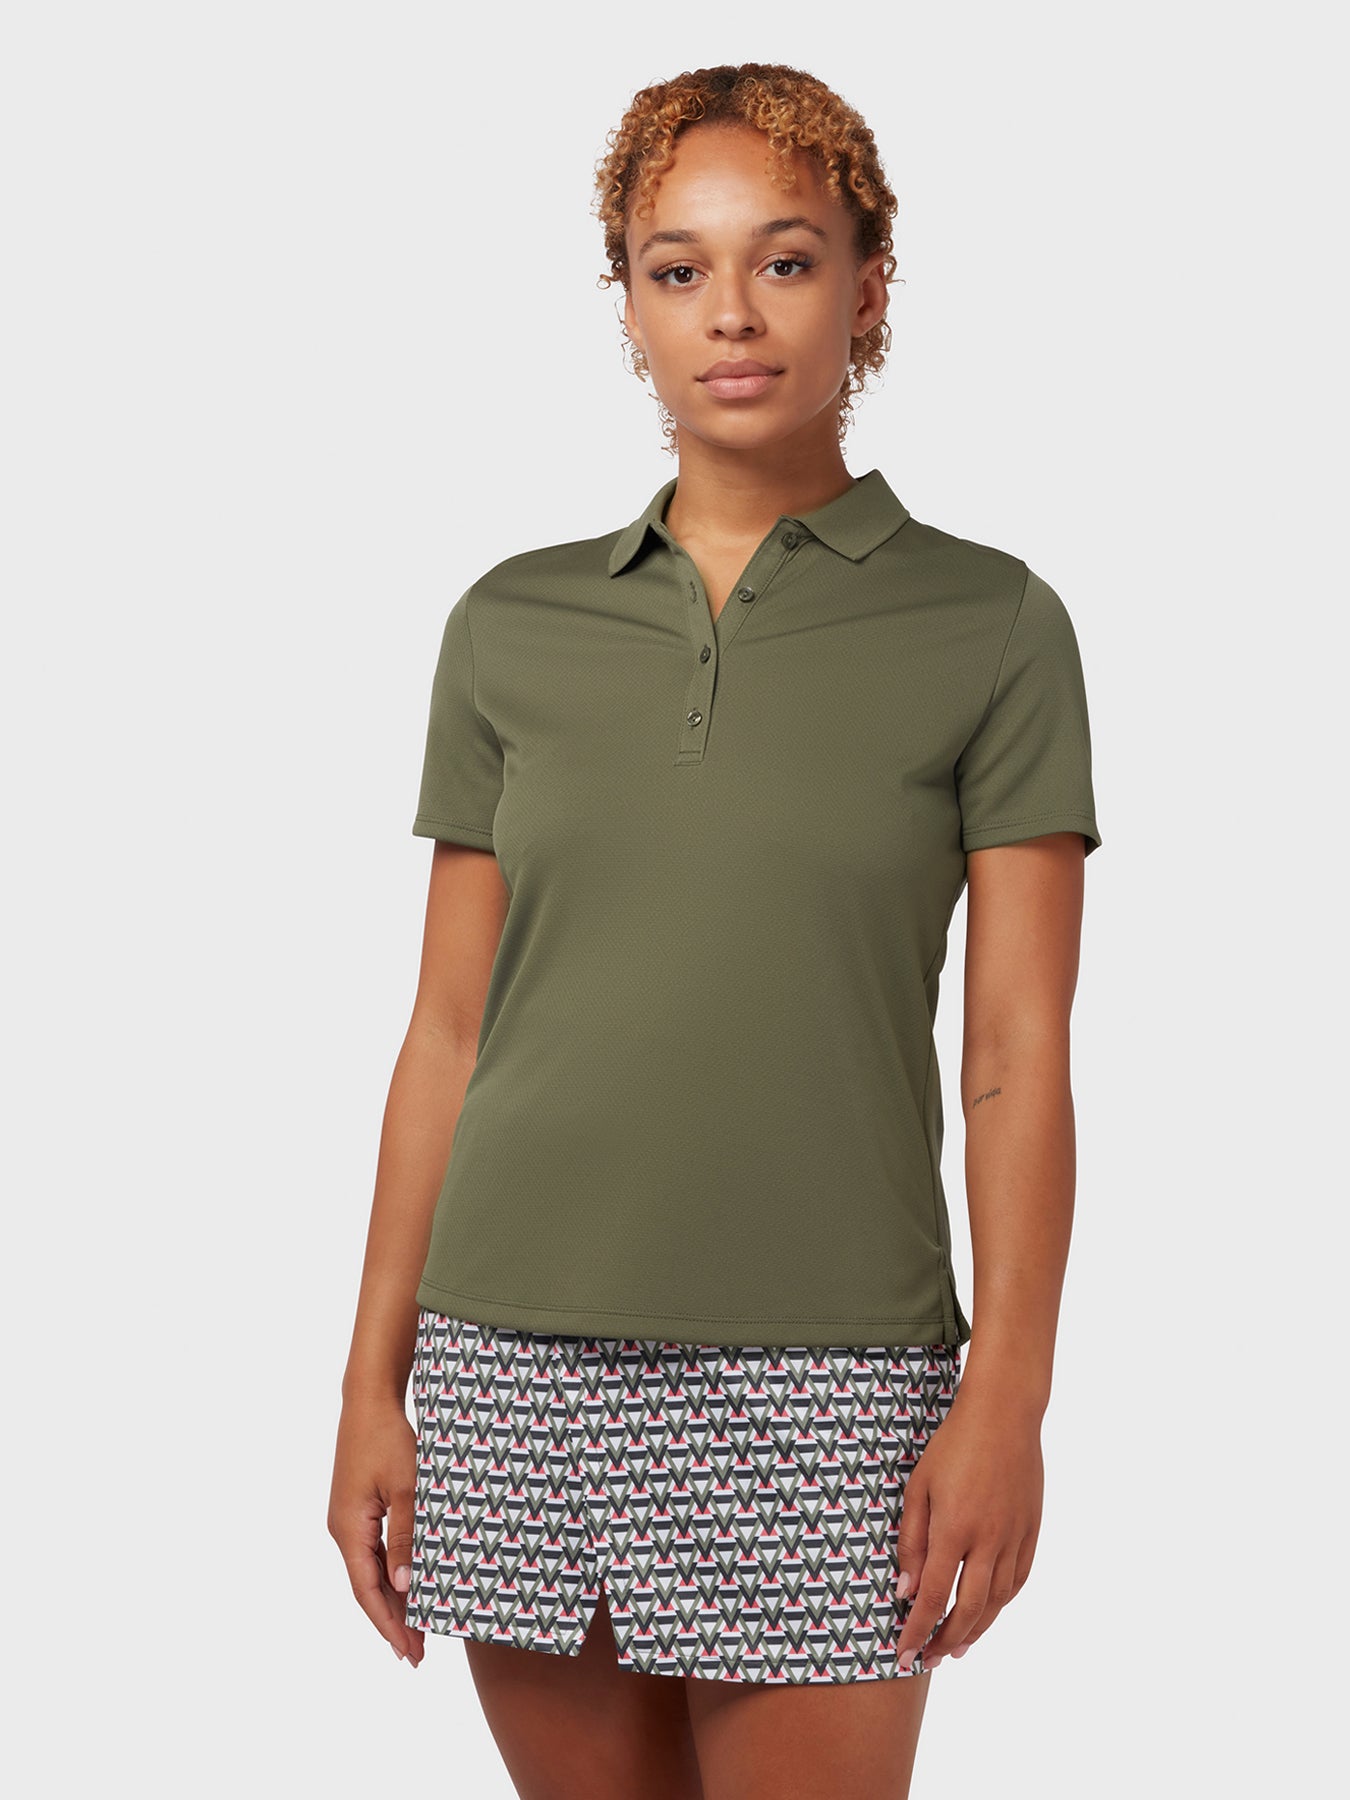 View Swing Tech Womens Polo In Industrial Green information